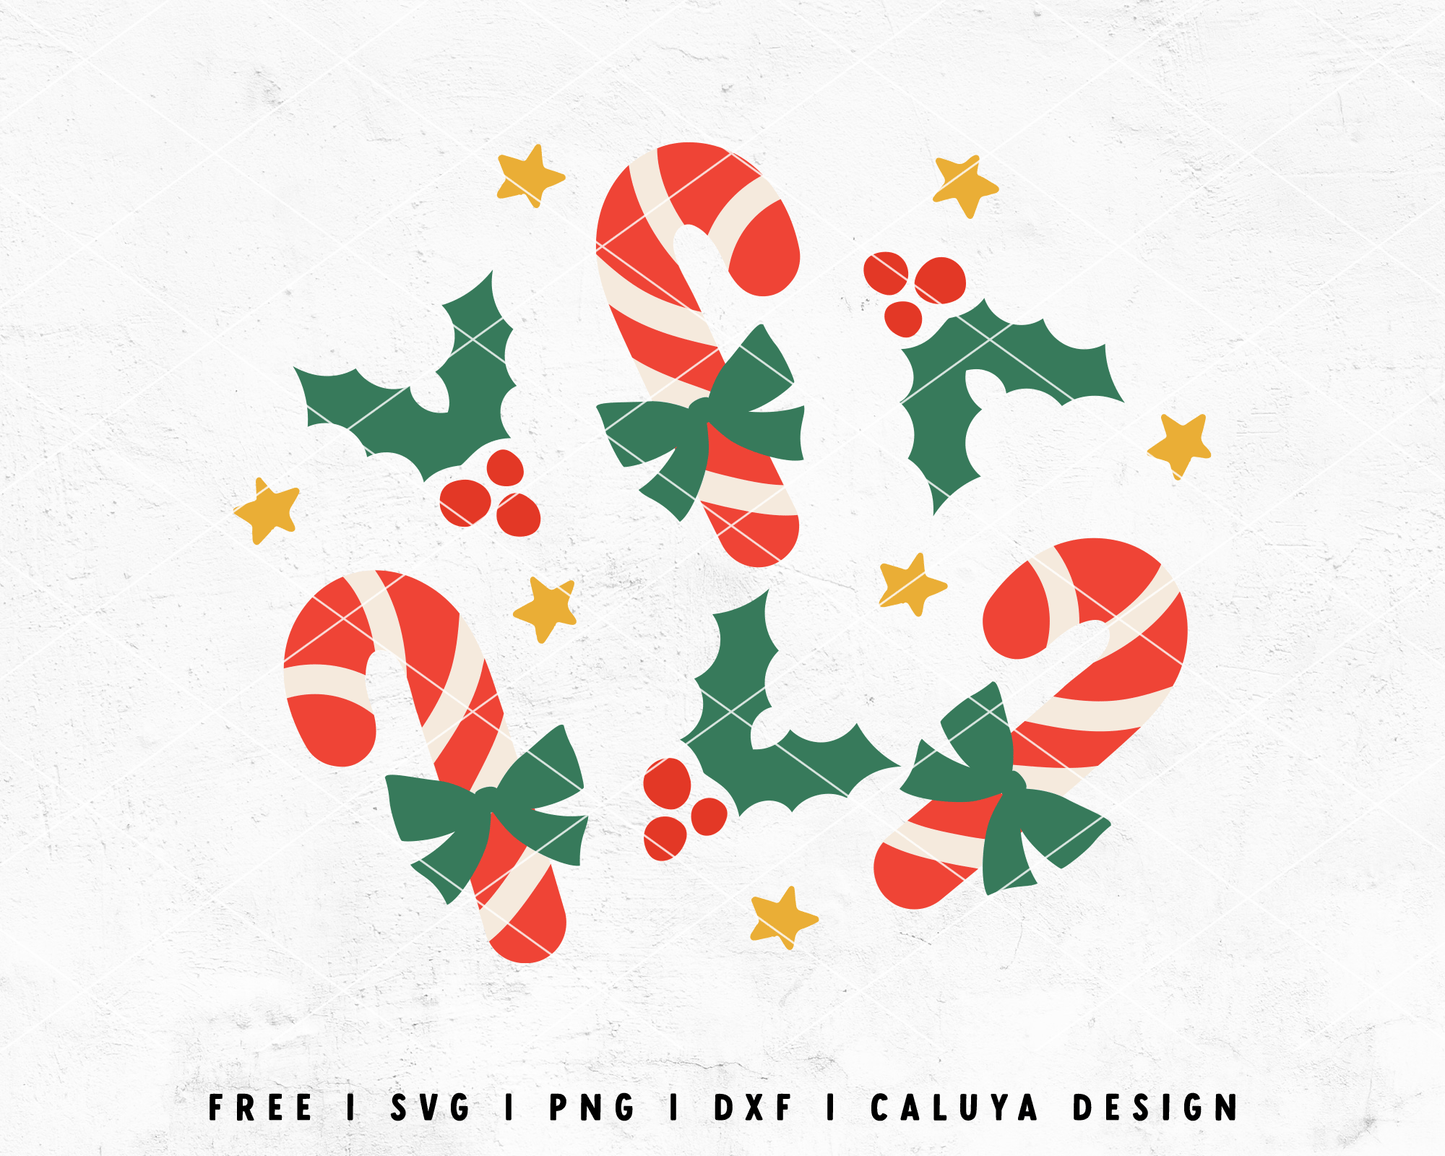 FREE Classic Candy Cane SVG | Classic Christmas SVG Cut File for Cricut, Cameo Silhouette | Free SVG Cut File